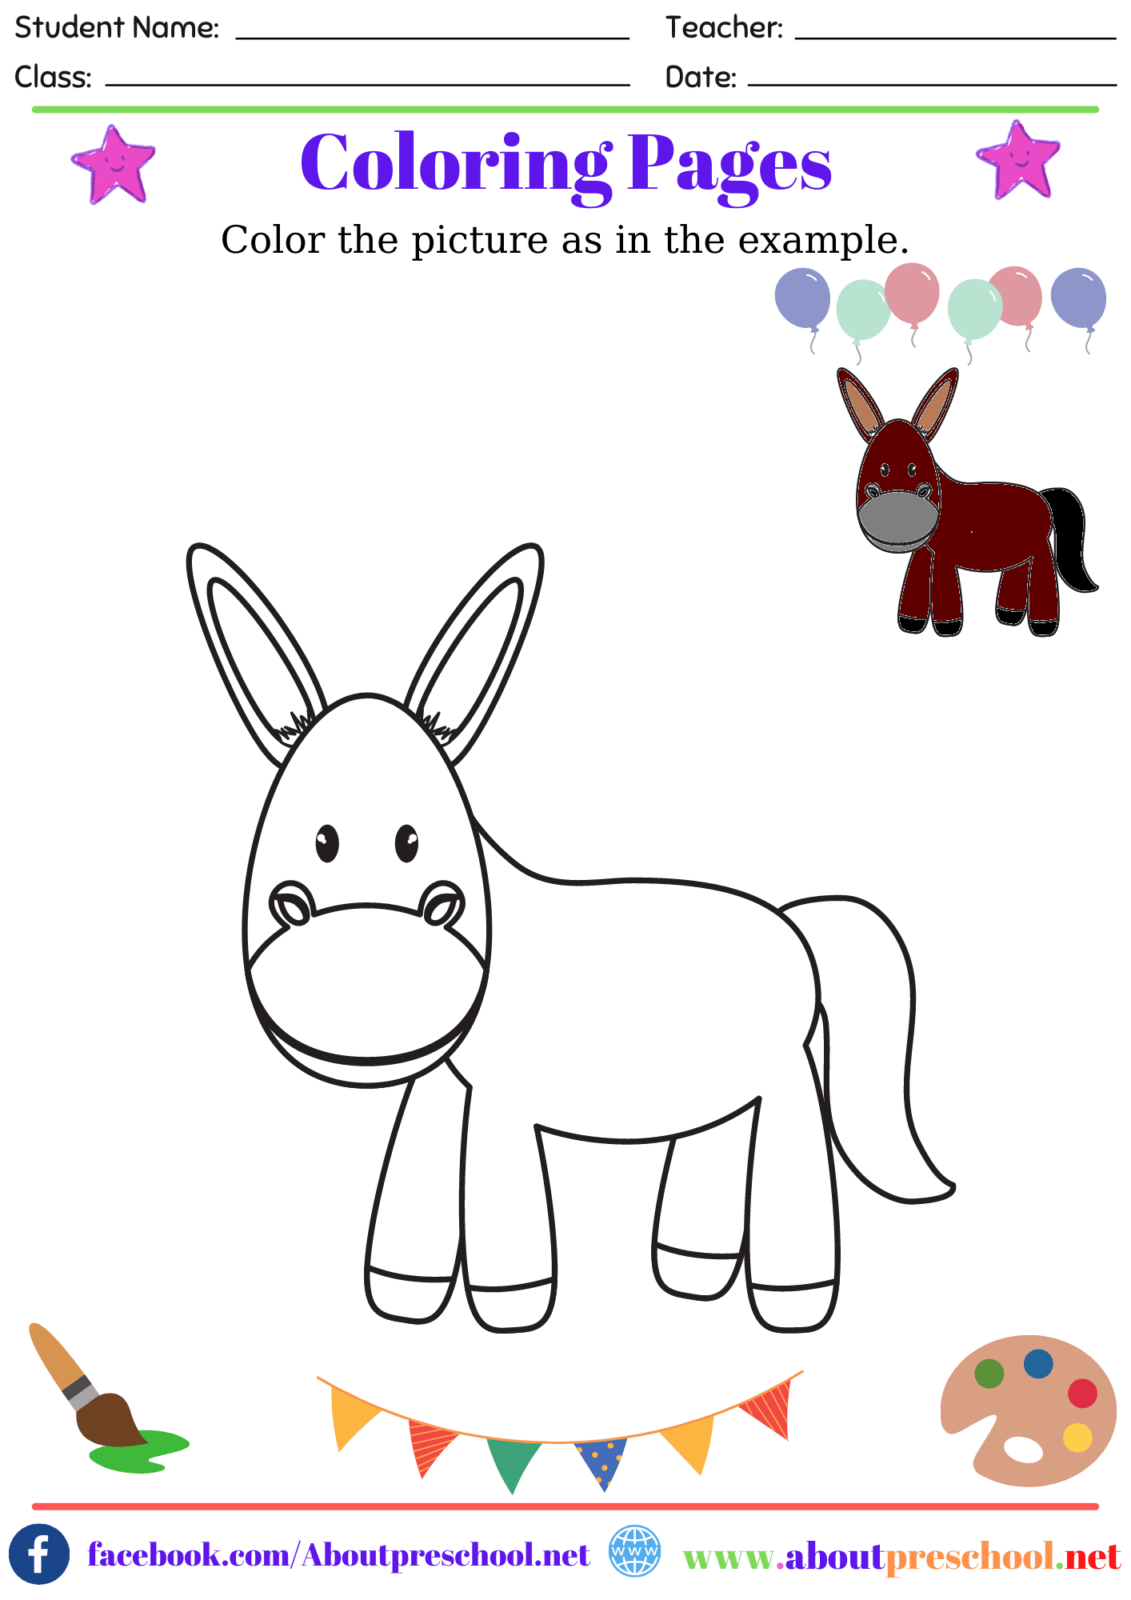 Coloring Pages-15